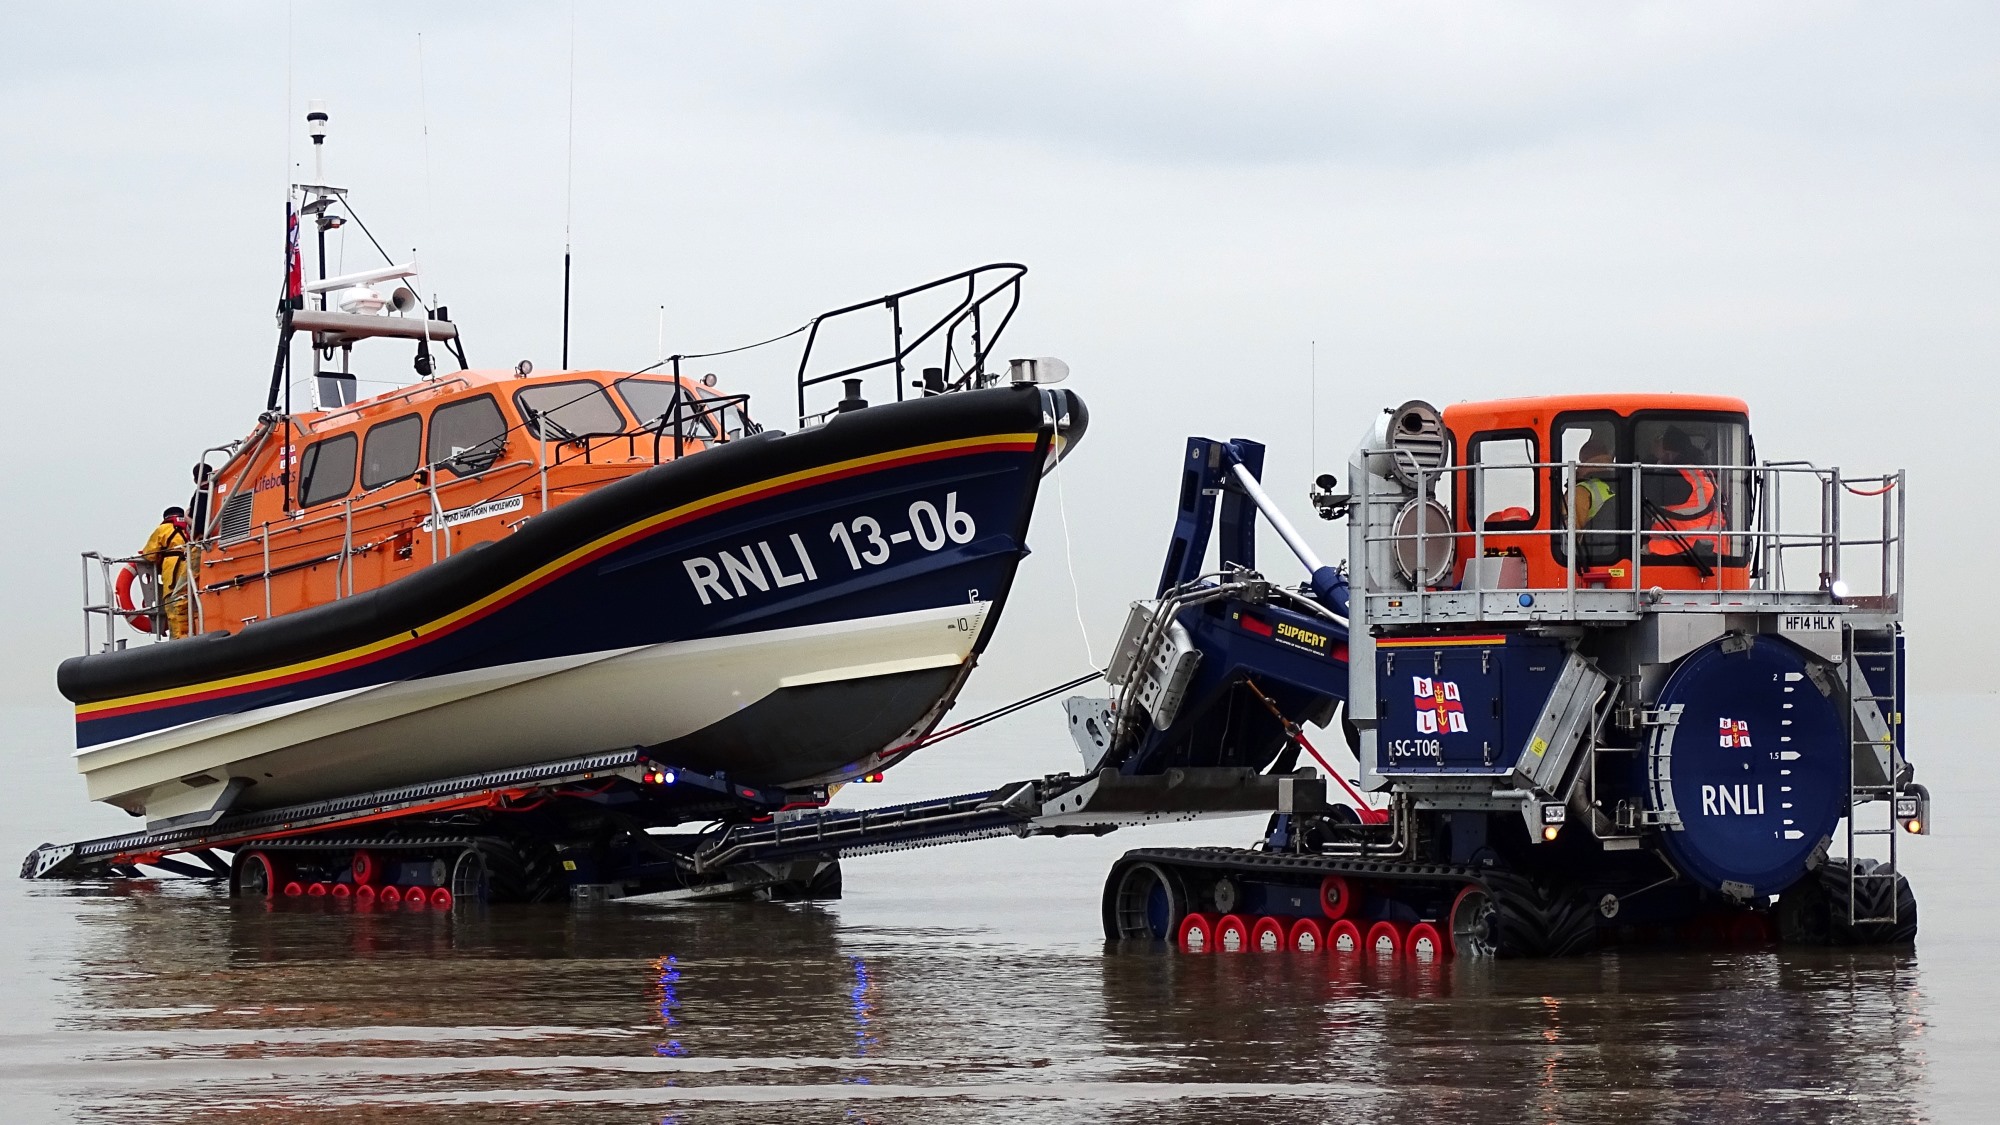 Trent Class Lifeboat - The RNLI's Lifeboat Fleet - RNLI